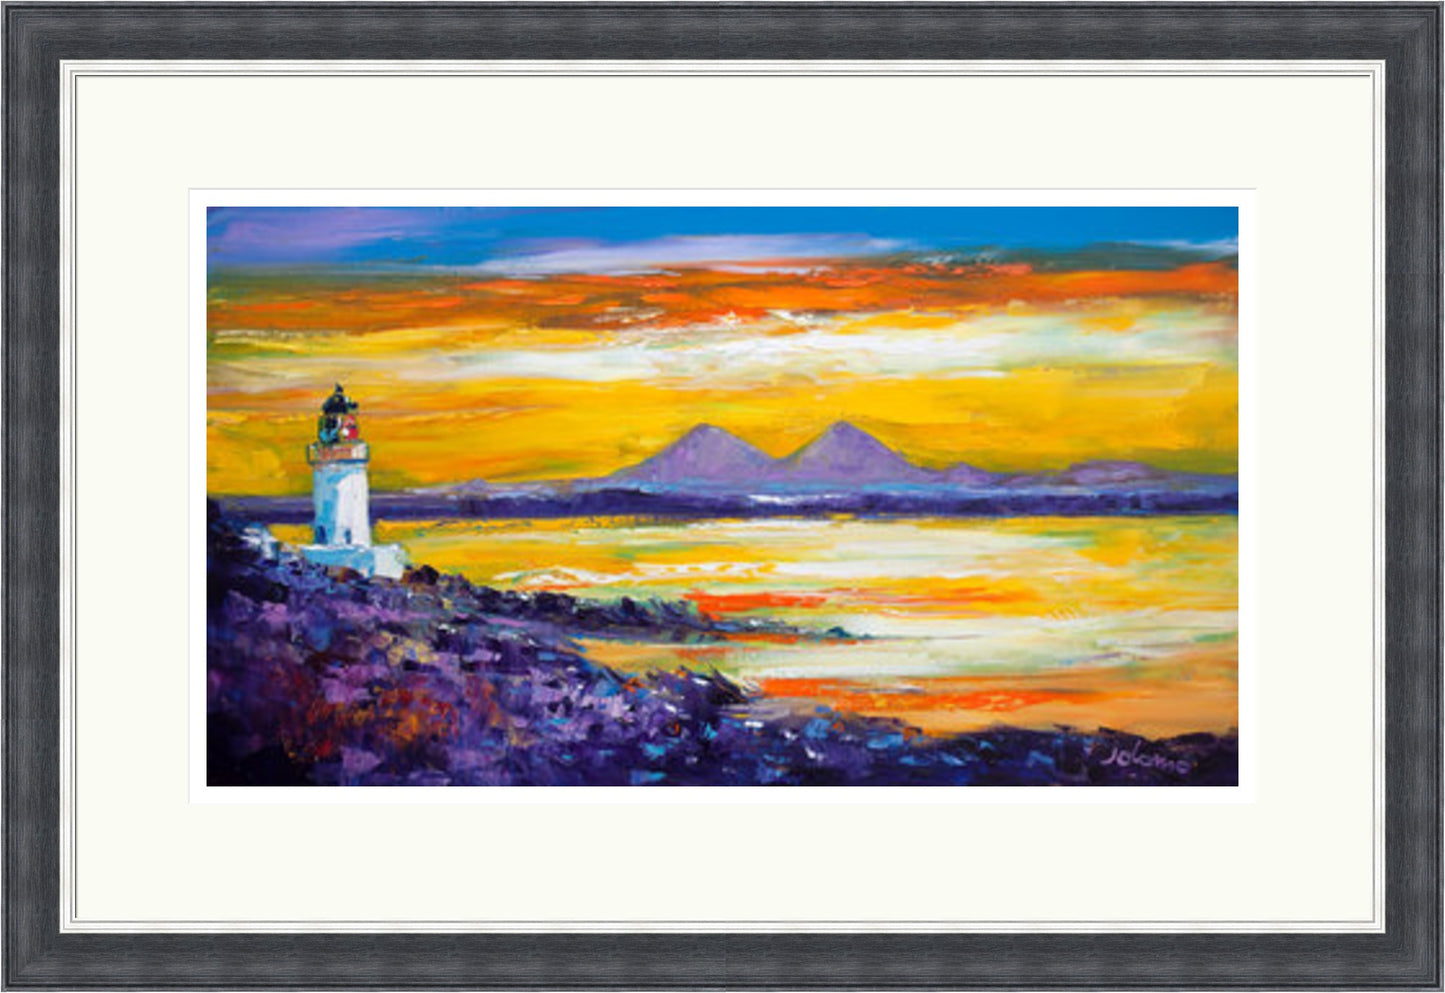 A Soft Dawnlight over Loch Indaal, Islay by John Lowrie Morrison (JOLOMO)